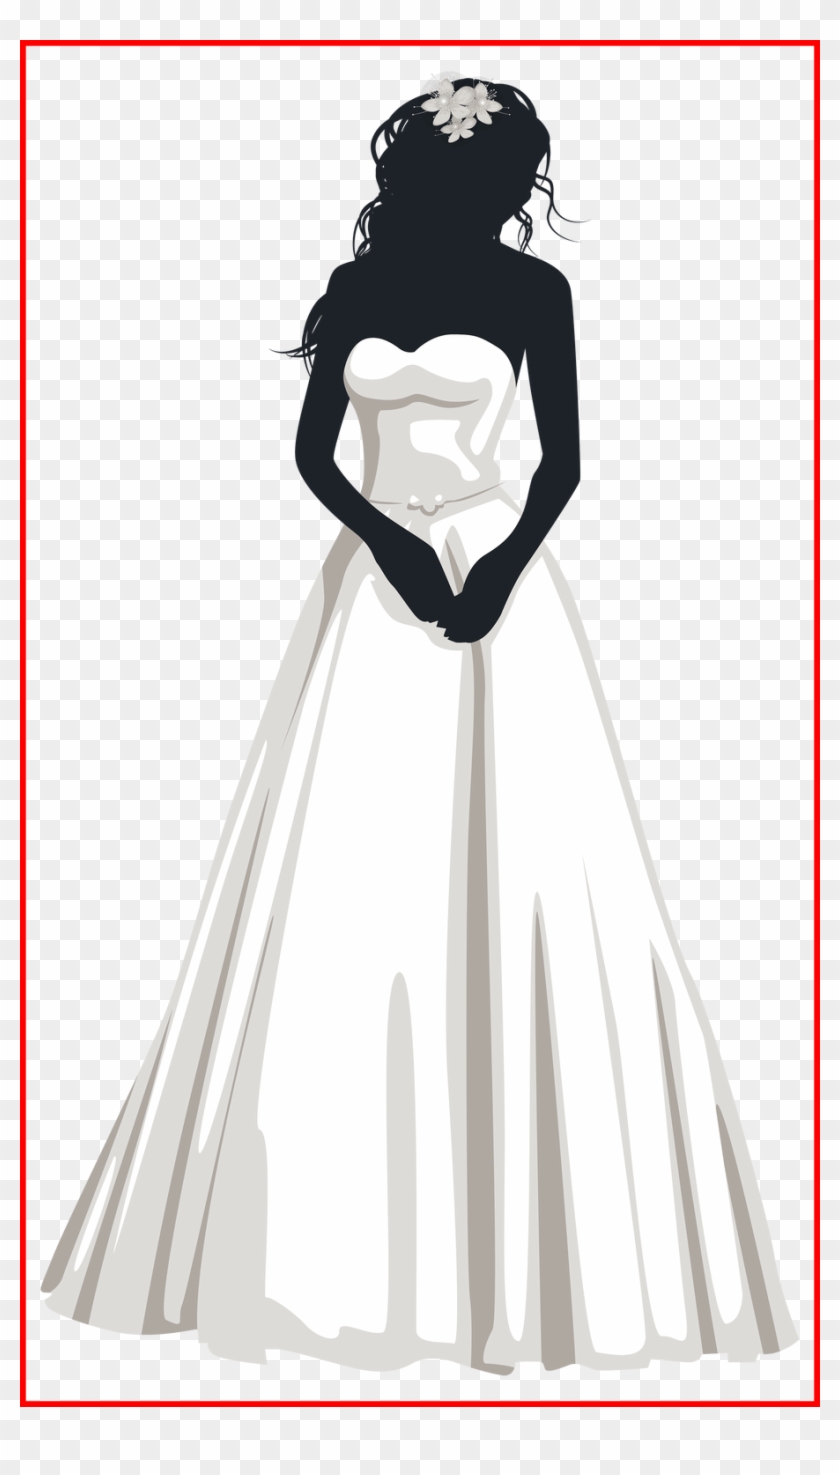 Astonishing Bride Silhouette - Bride Drawing Png Clipart #5002231